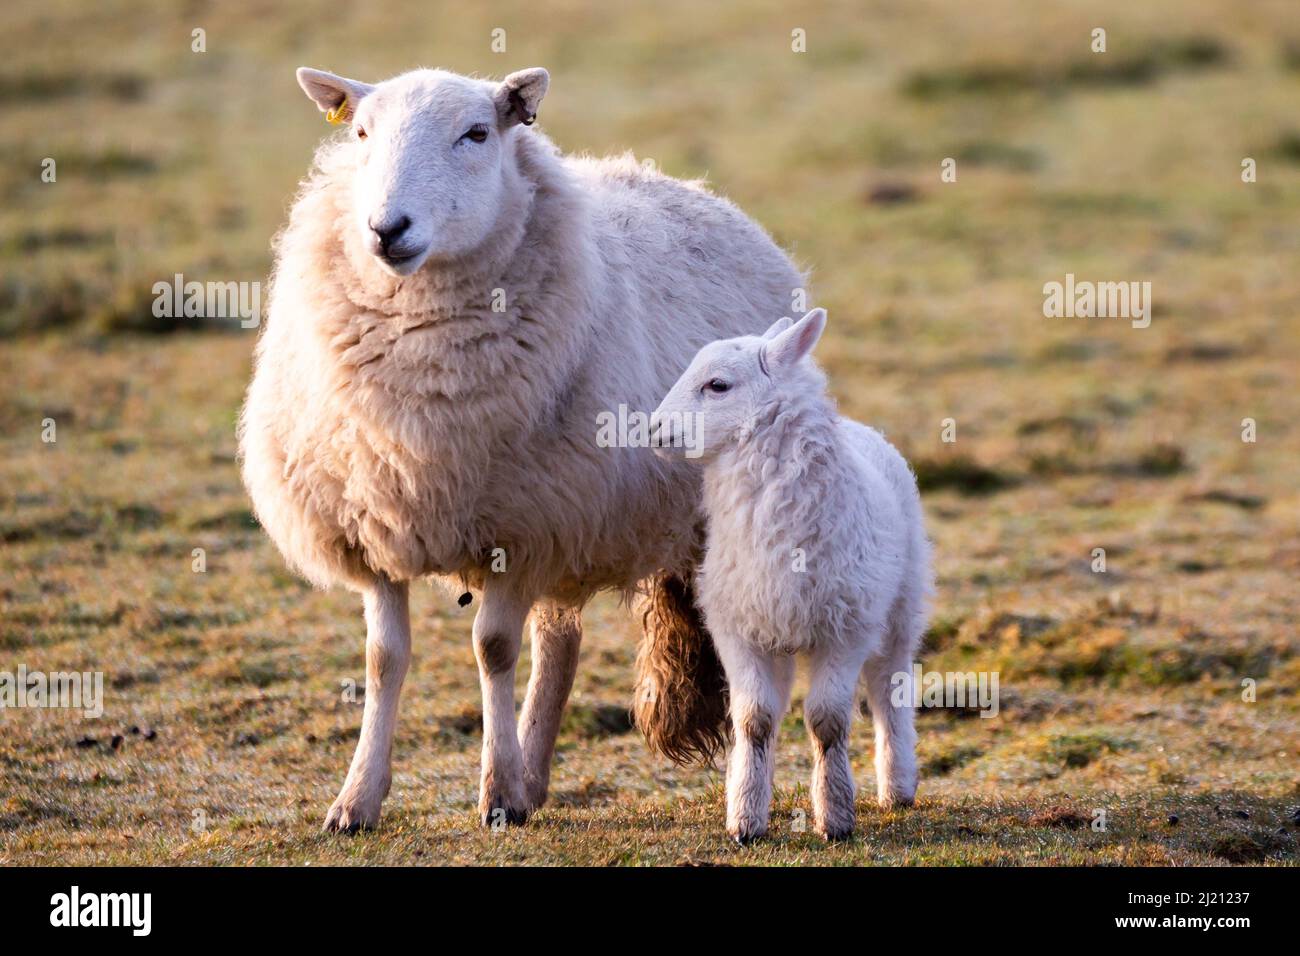 Near Tynygraig, Ceredigion, Wales, UK. 29th March 2022  UK Weather: A lamb standing next to its mother in the morning sun, as temperatures feel a lot cooler this morning near Tynygraig in mid Wales. © Ian Jones/Alamy Live News Stock Photo